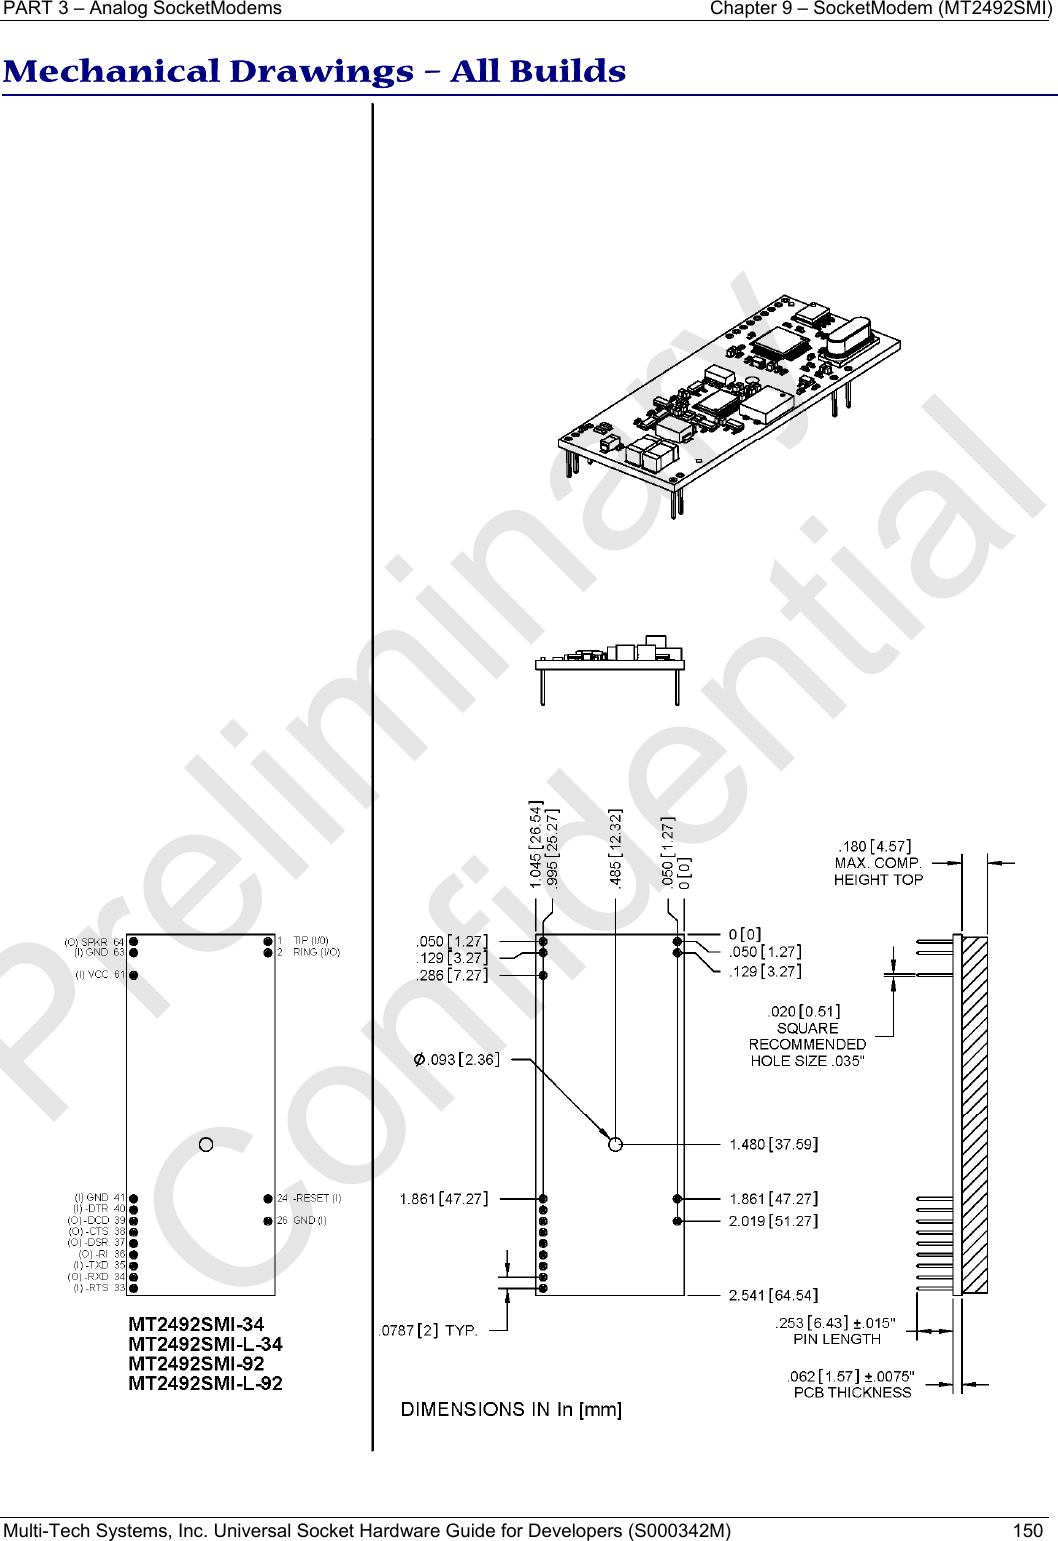 PART 3 – Analog SocketModems     Chapter 9 – SocketModem (MT2492SMI) Multi-Tech Systems, Inc. Universal Socket Hardware Guide for Developers (S000342M)  150  Mechanical Drawings – All Builds    Preliminary  Confidential